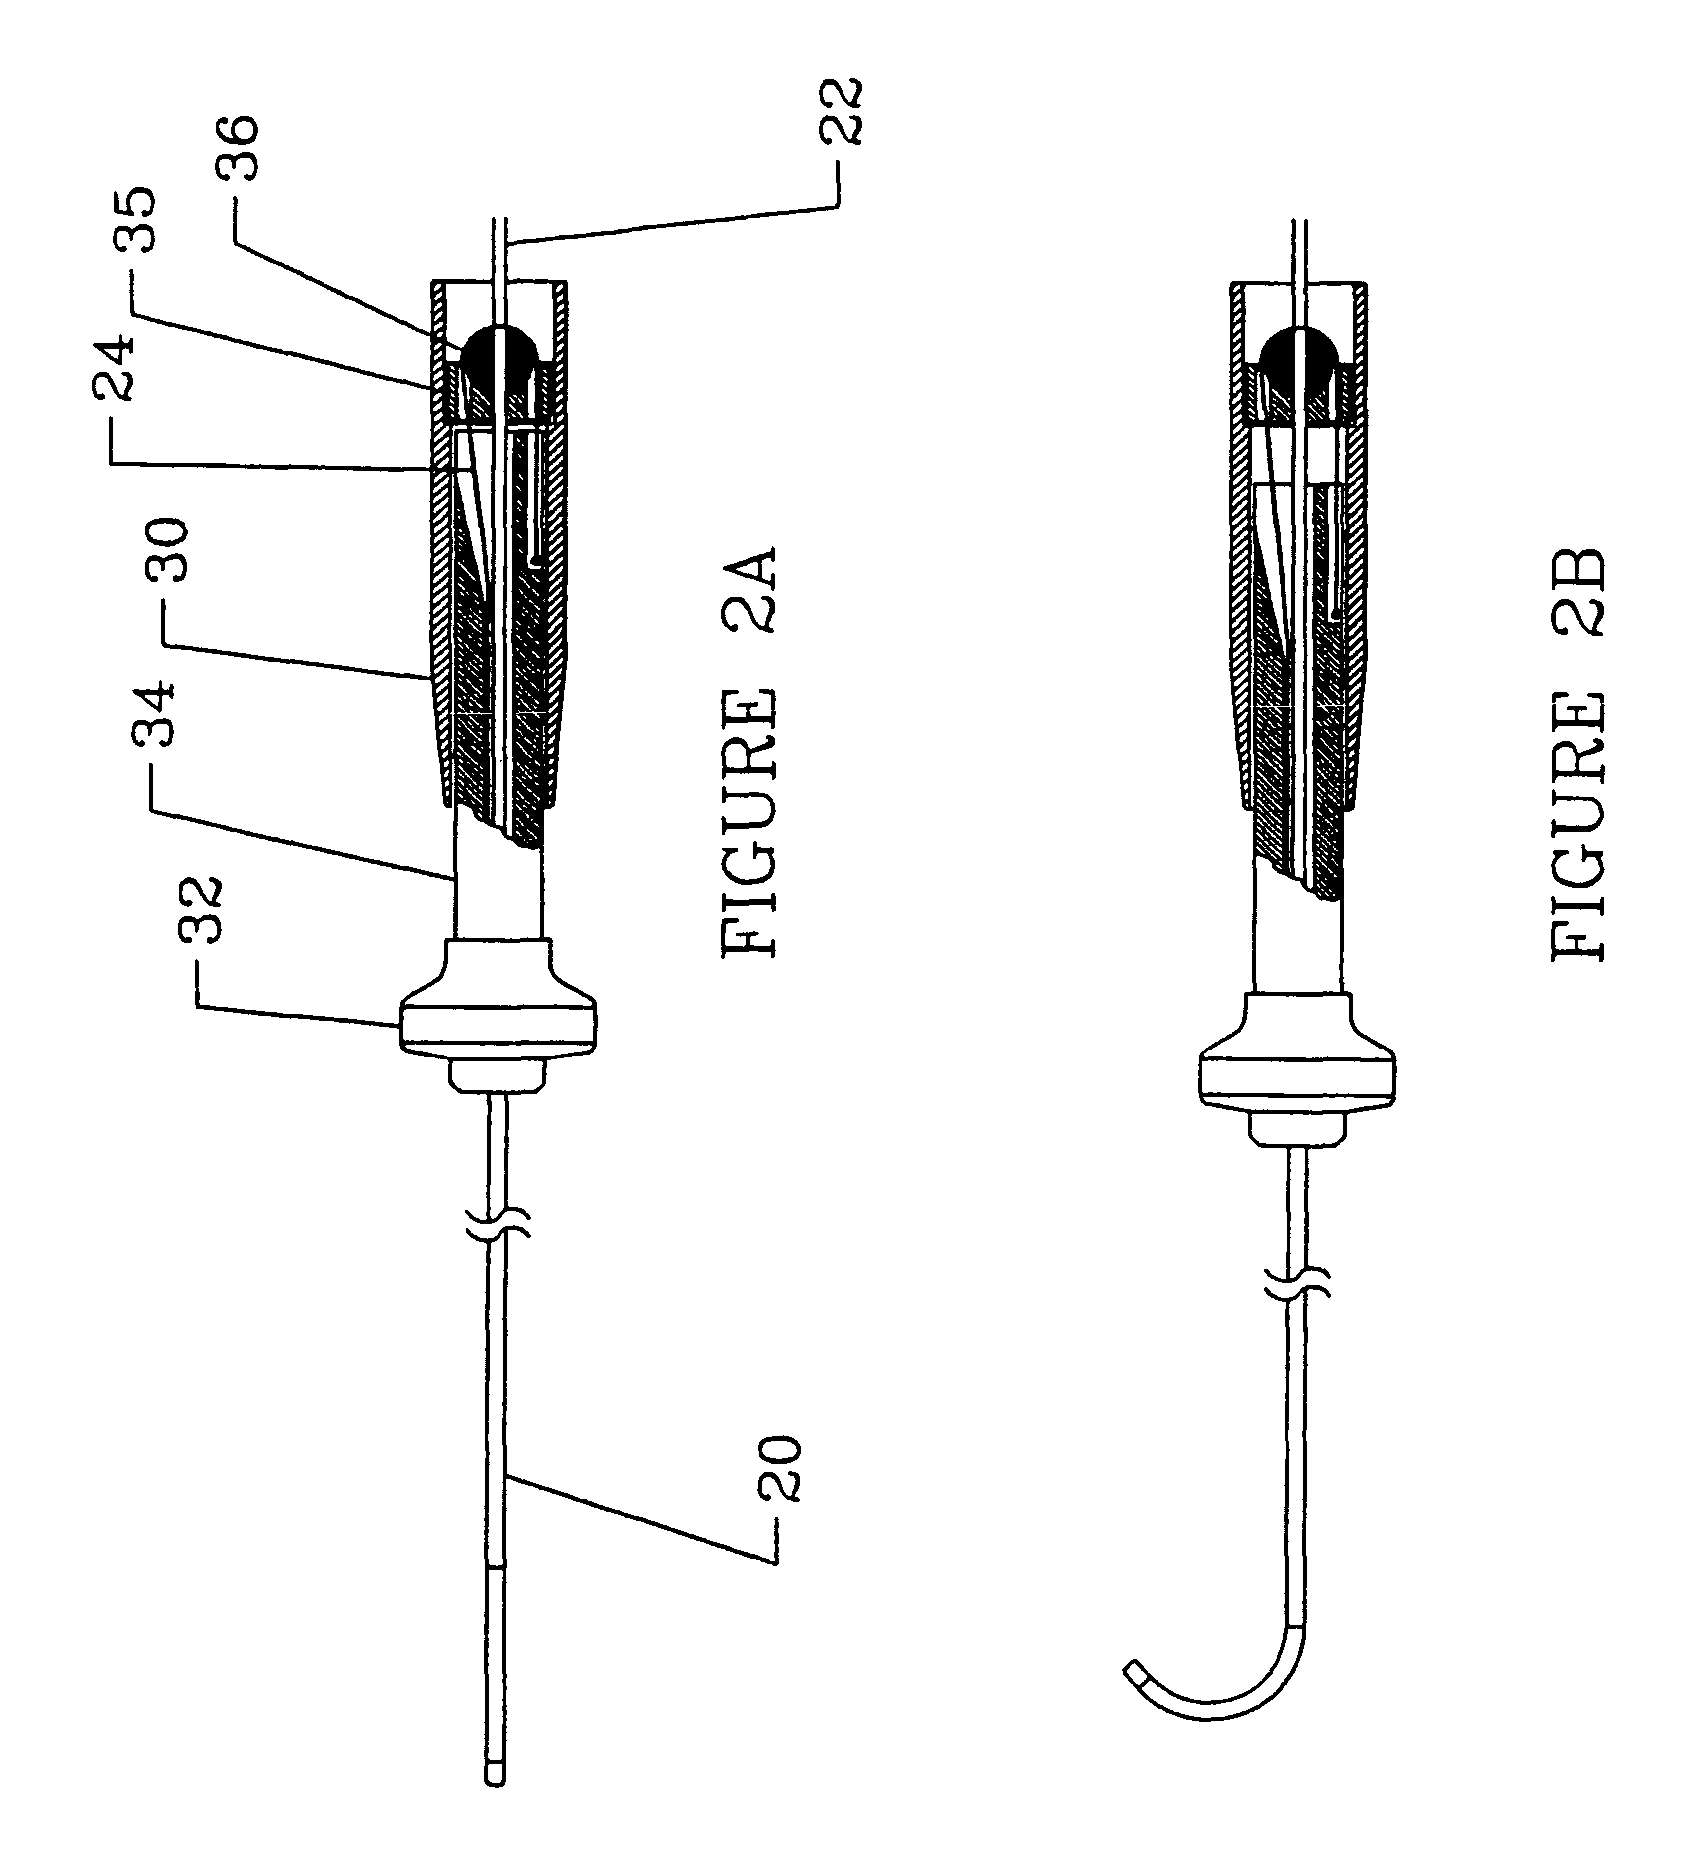 Deflectable microimplant delivery system